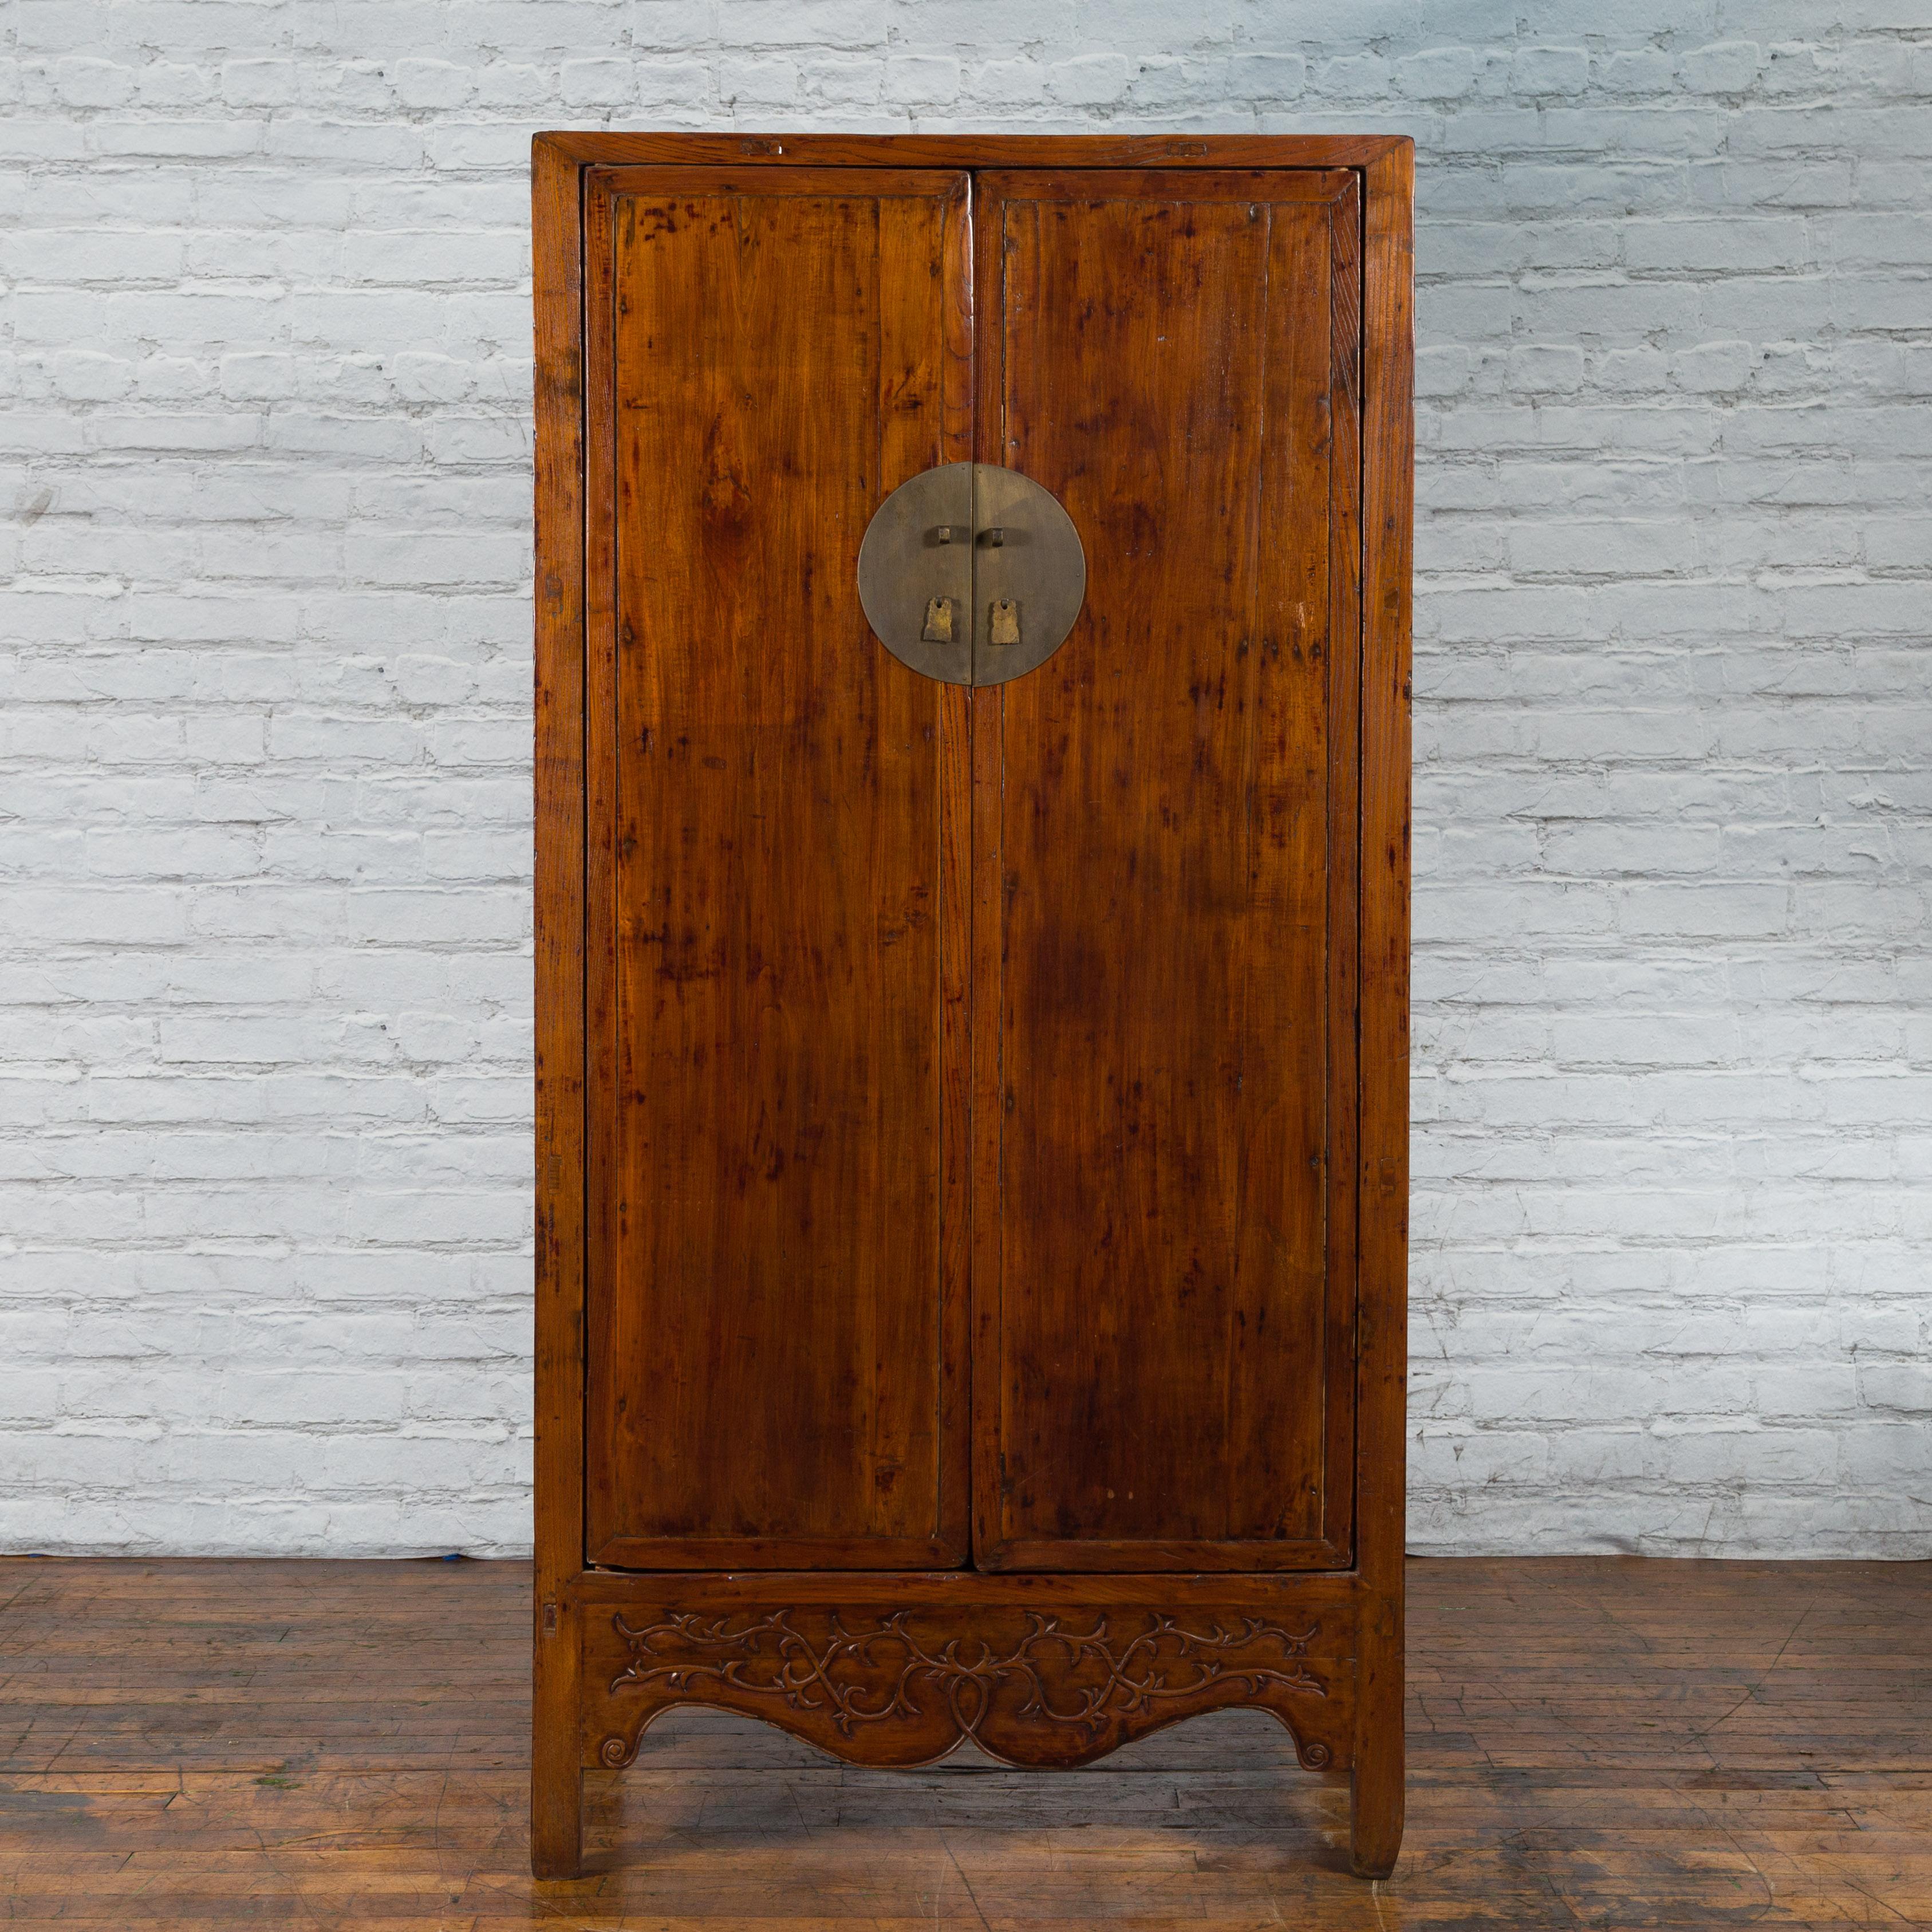 A Chinese Qing Dynasty period elm wood cabinet from the 19th century with two large doors, bronze medallion hardware, carved apron and inner shelves with hidden drawers. Created in China during the Qing Dynasty period in the 19th century, this large